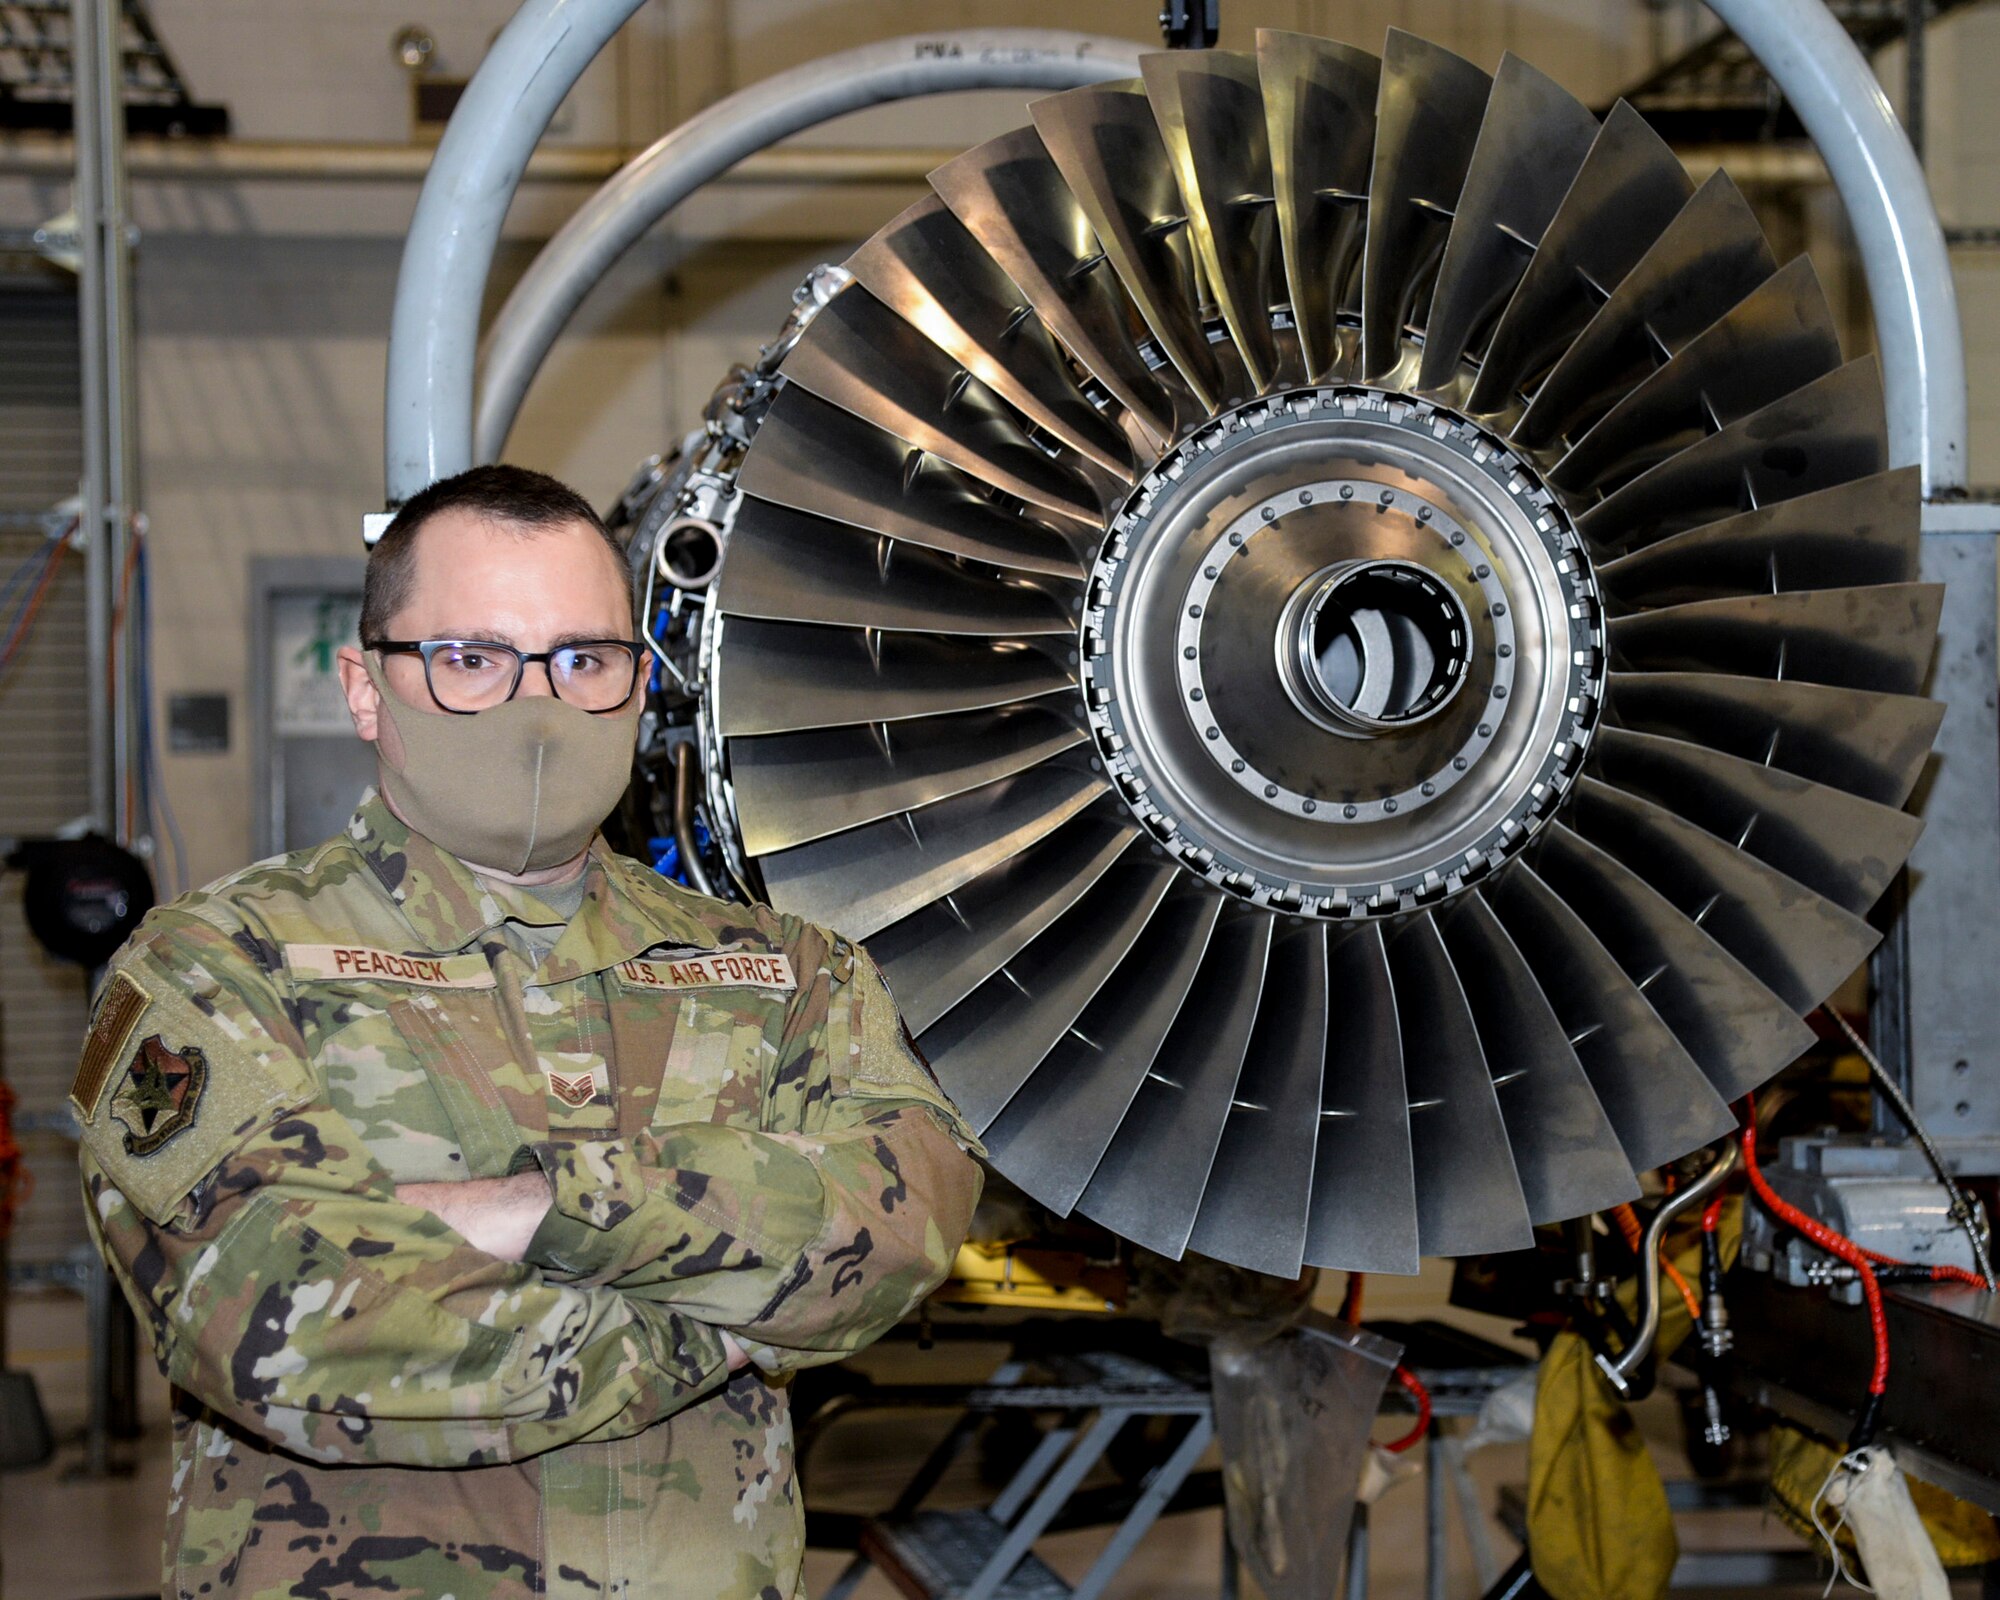 An image of U.S. Air Force Staff Sgt. Lewis Peacock, 177th Maintenance Group engine mechanic, posing with a General Electric F110 turbofan engine.